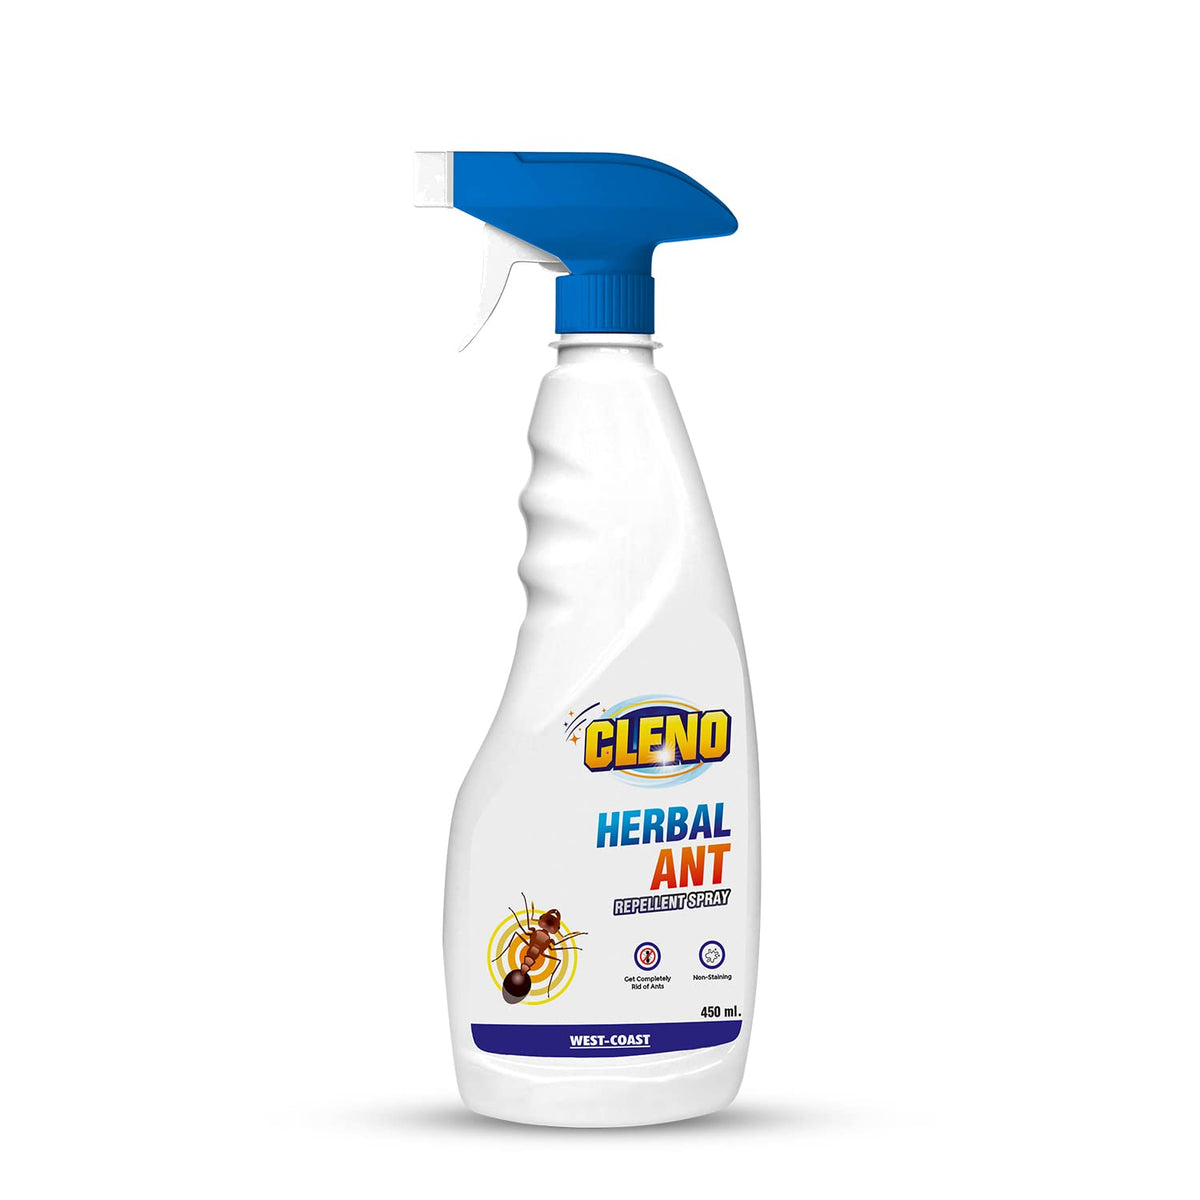 Cleno Herbal Ant Repellent Spray|Kills and Repels Ants, Roaches, Fleas and More - 450 ml (Ready to Use)